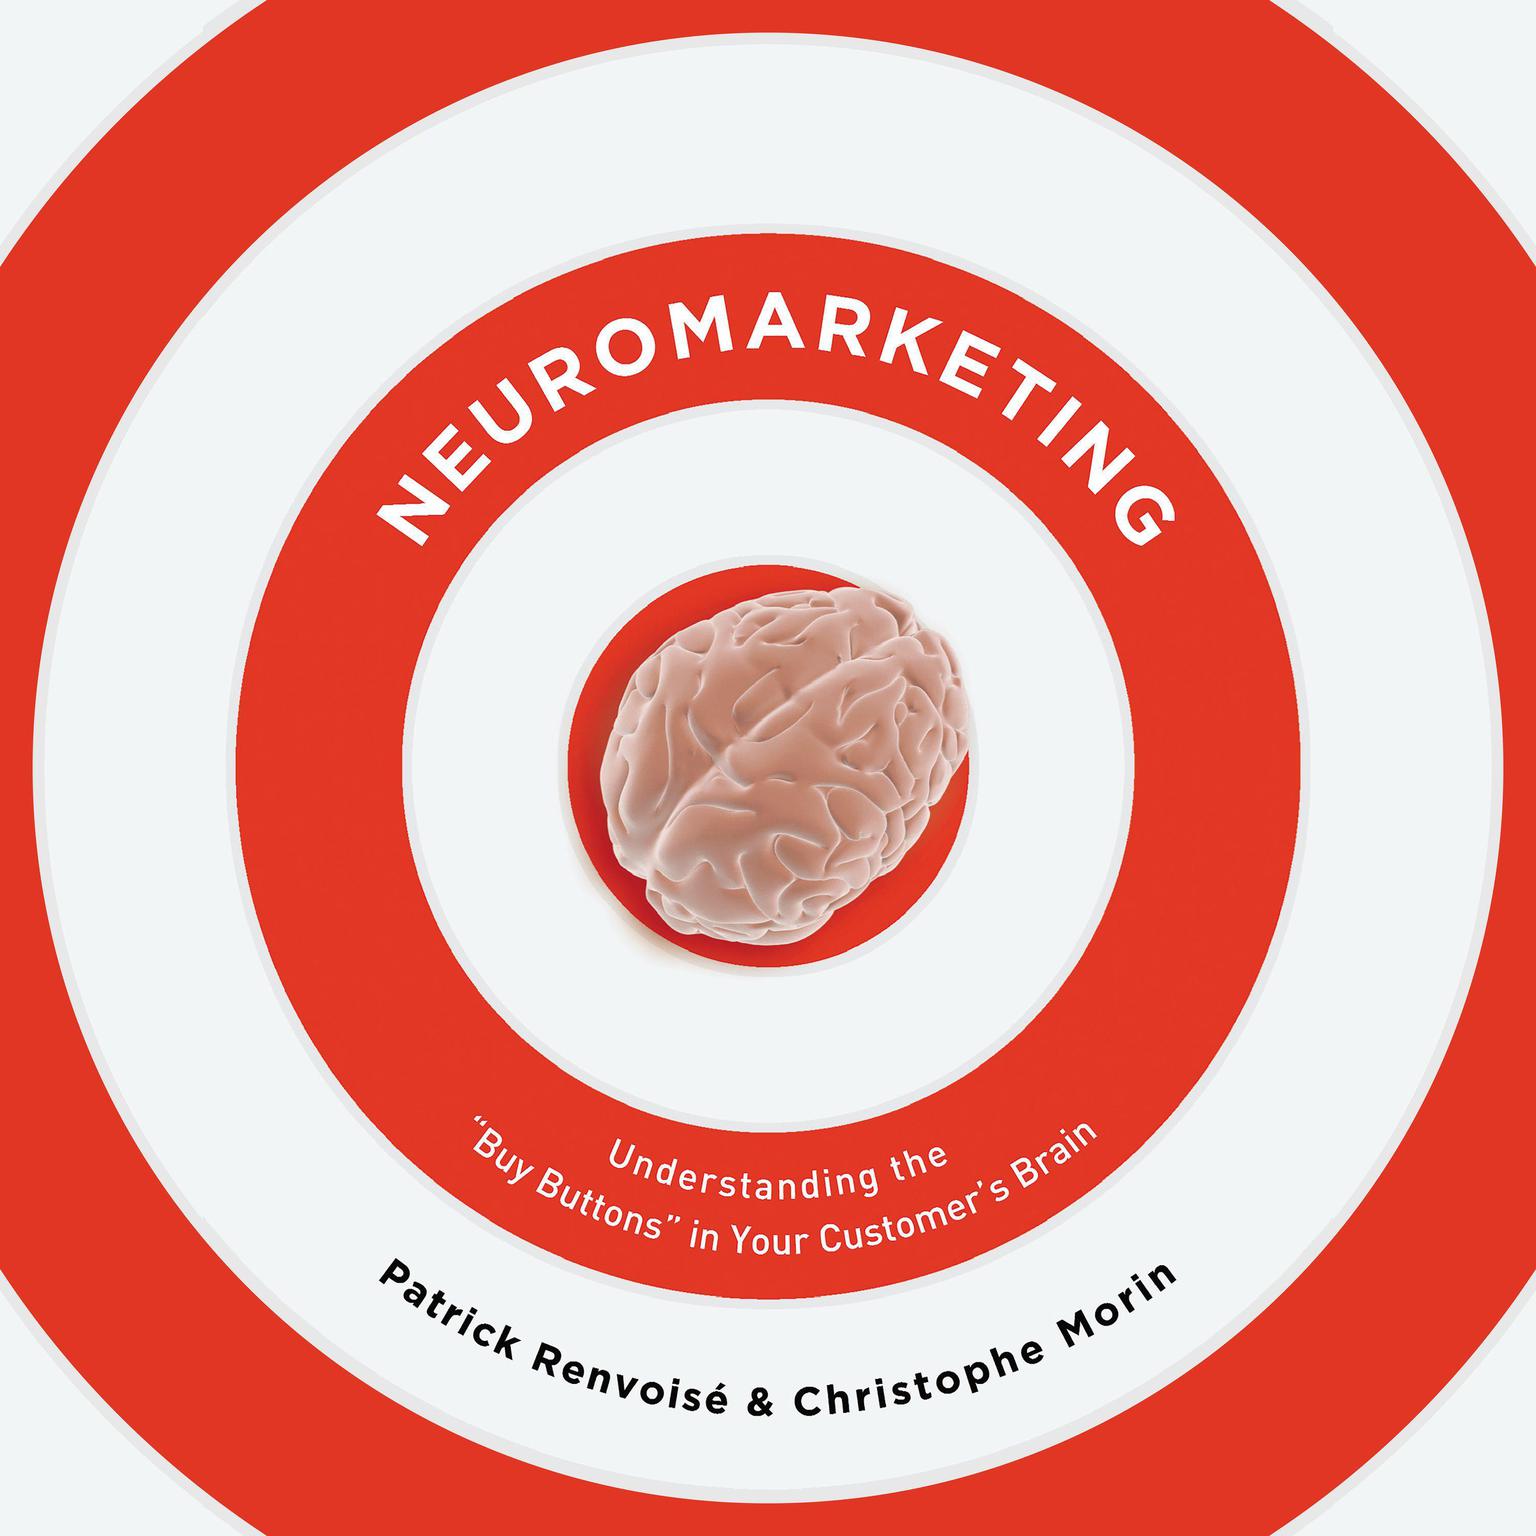 Neuromarketing: Understanding the Buy Buttons in Your Customers Brain Audiobook, by Christophe Morin